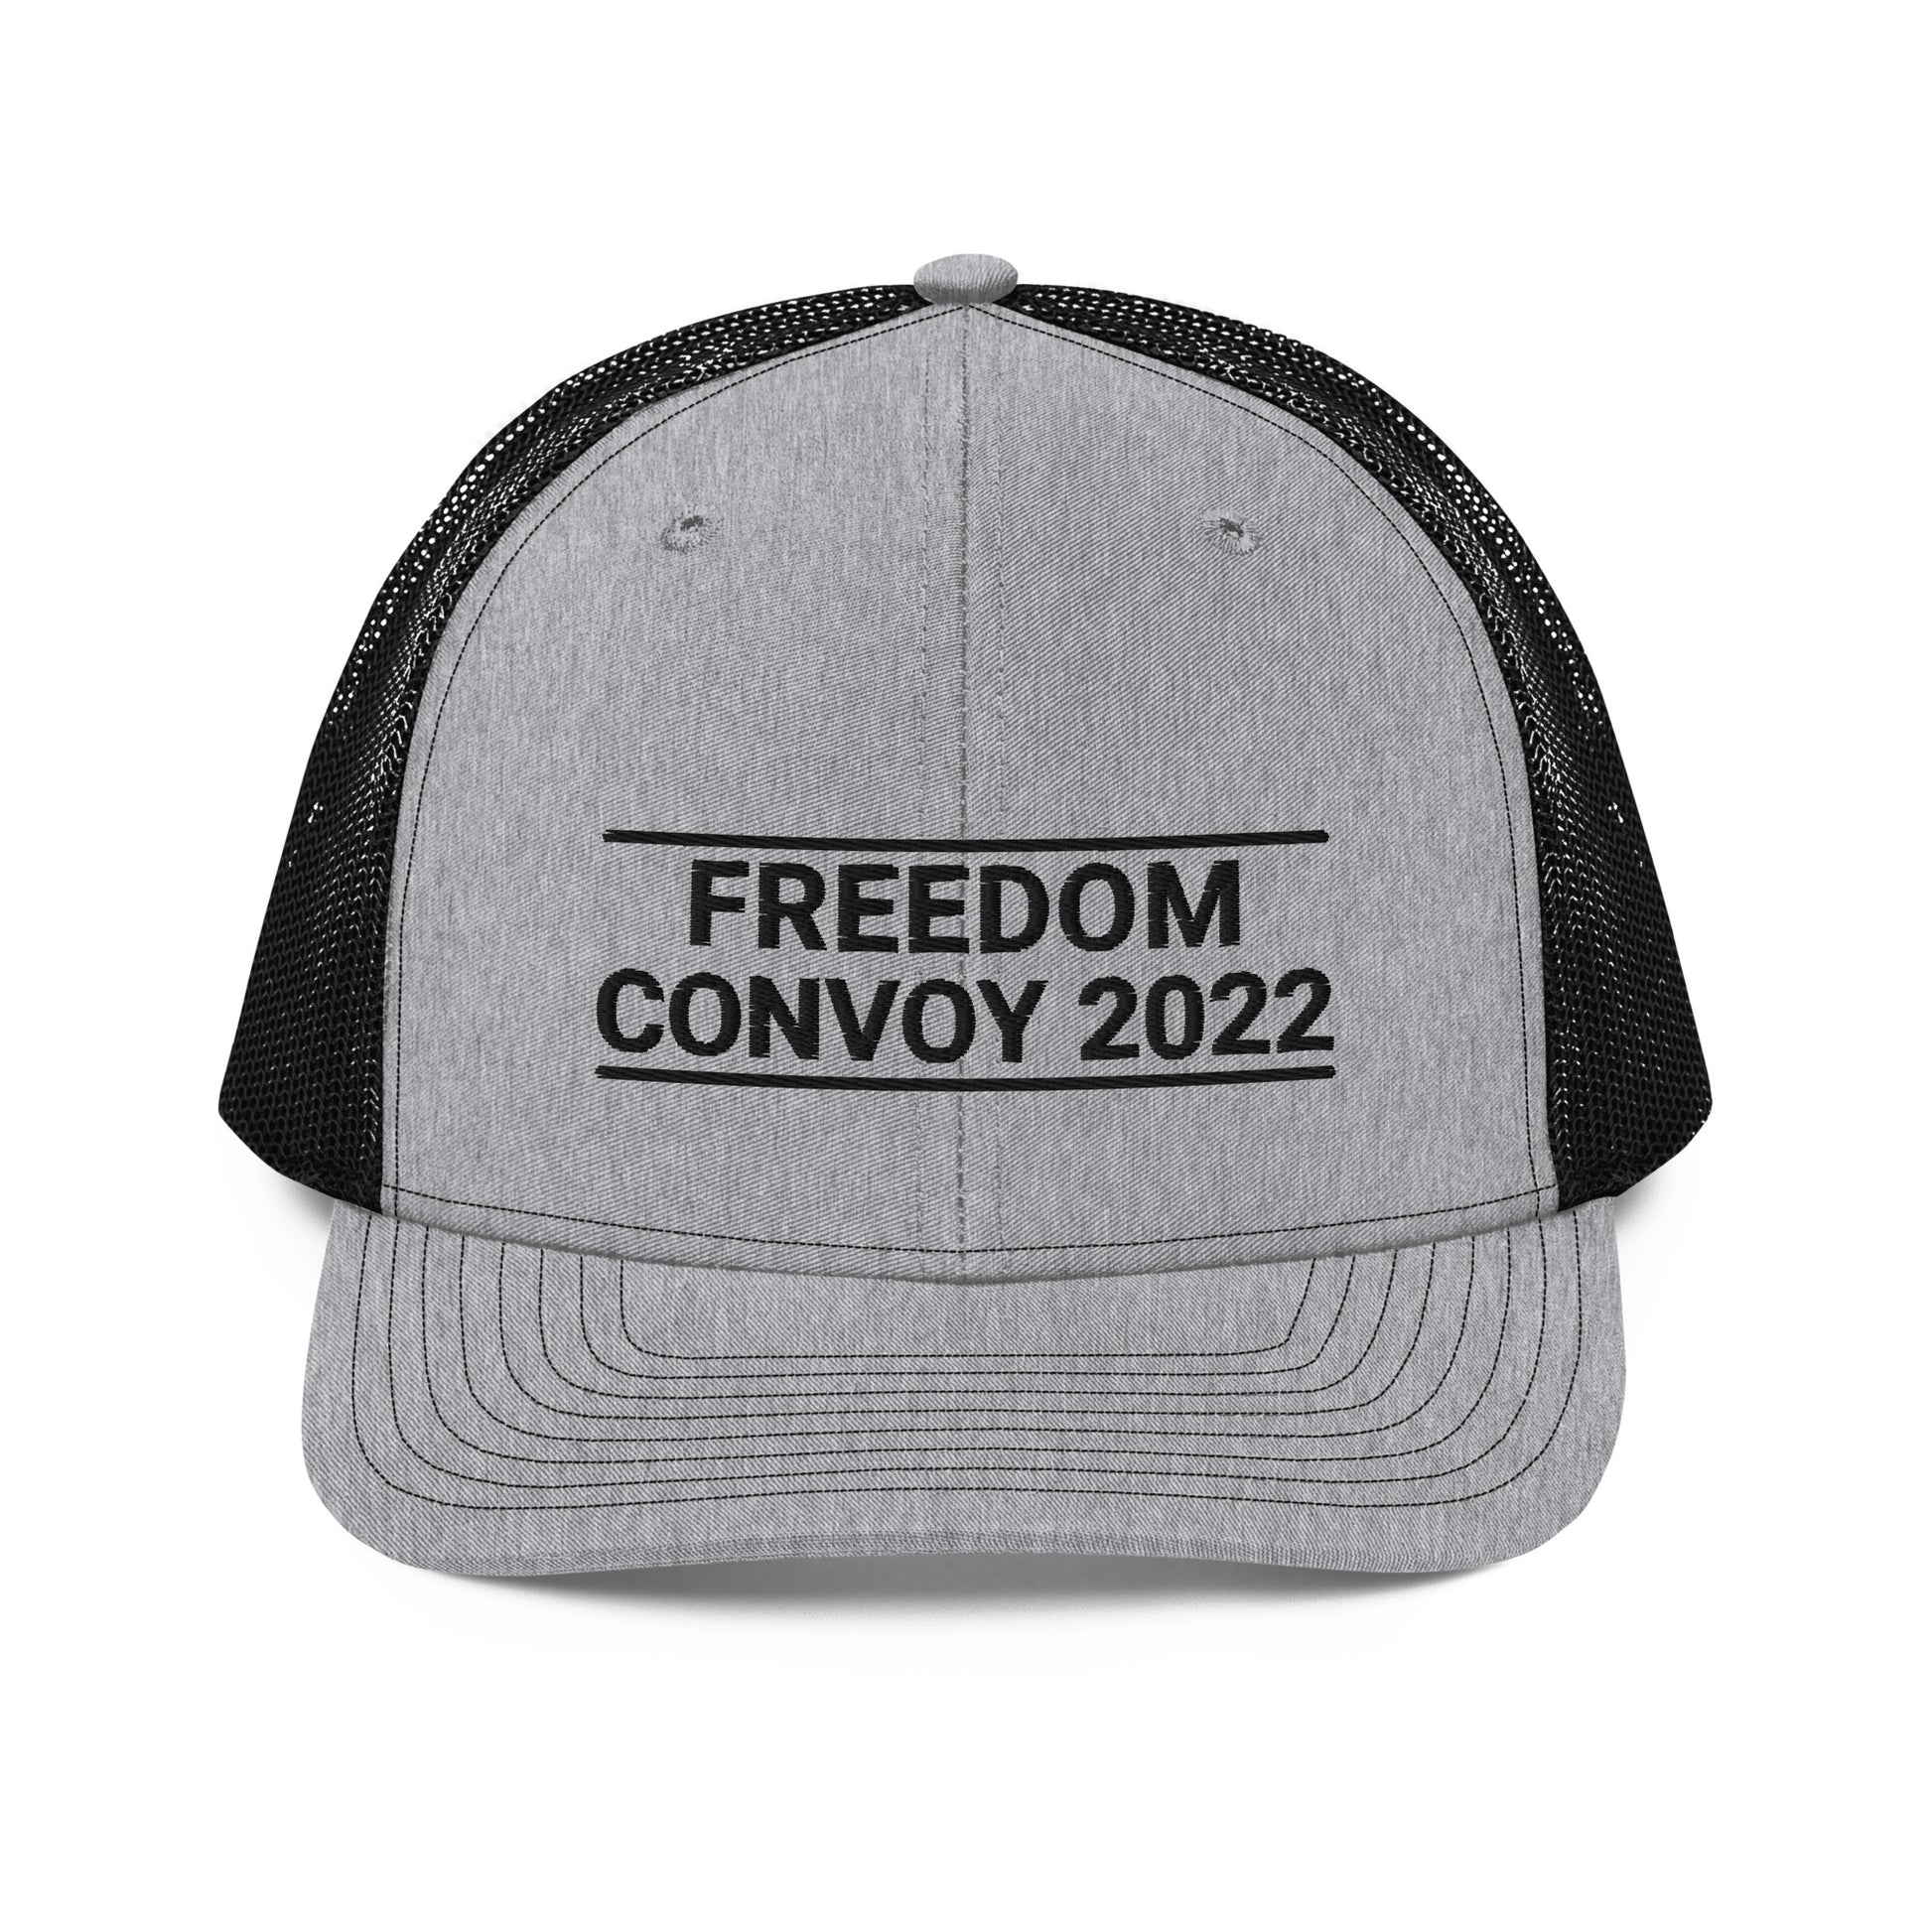 Freedom Convoy 2022 embroidered Richardson 1122 Gray and Black hat.